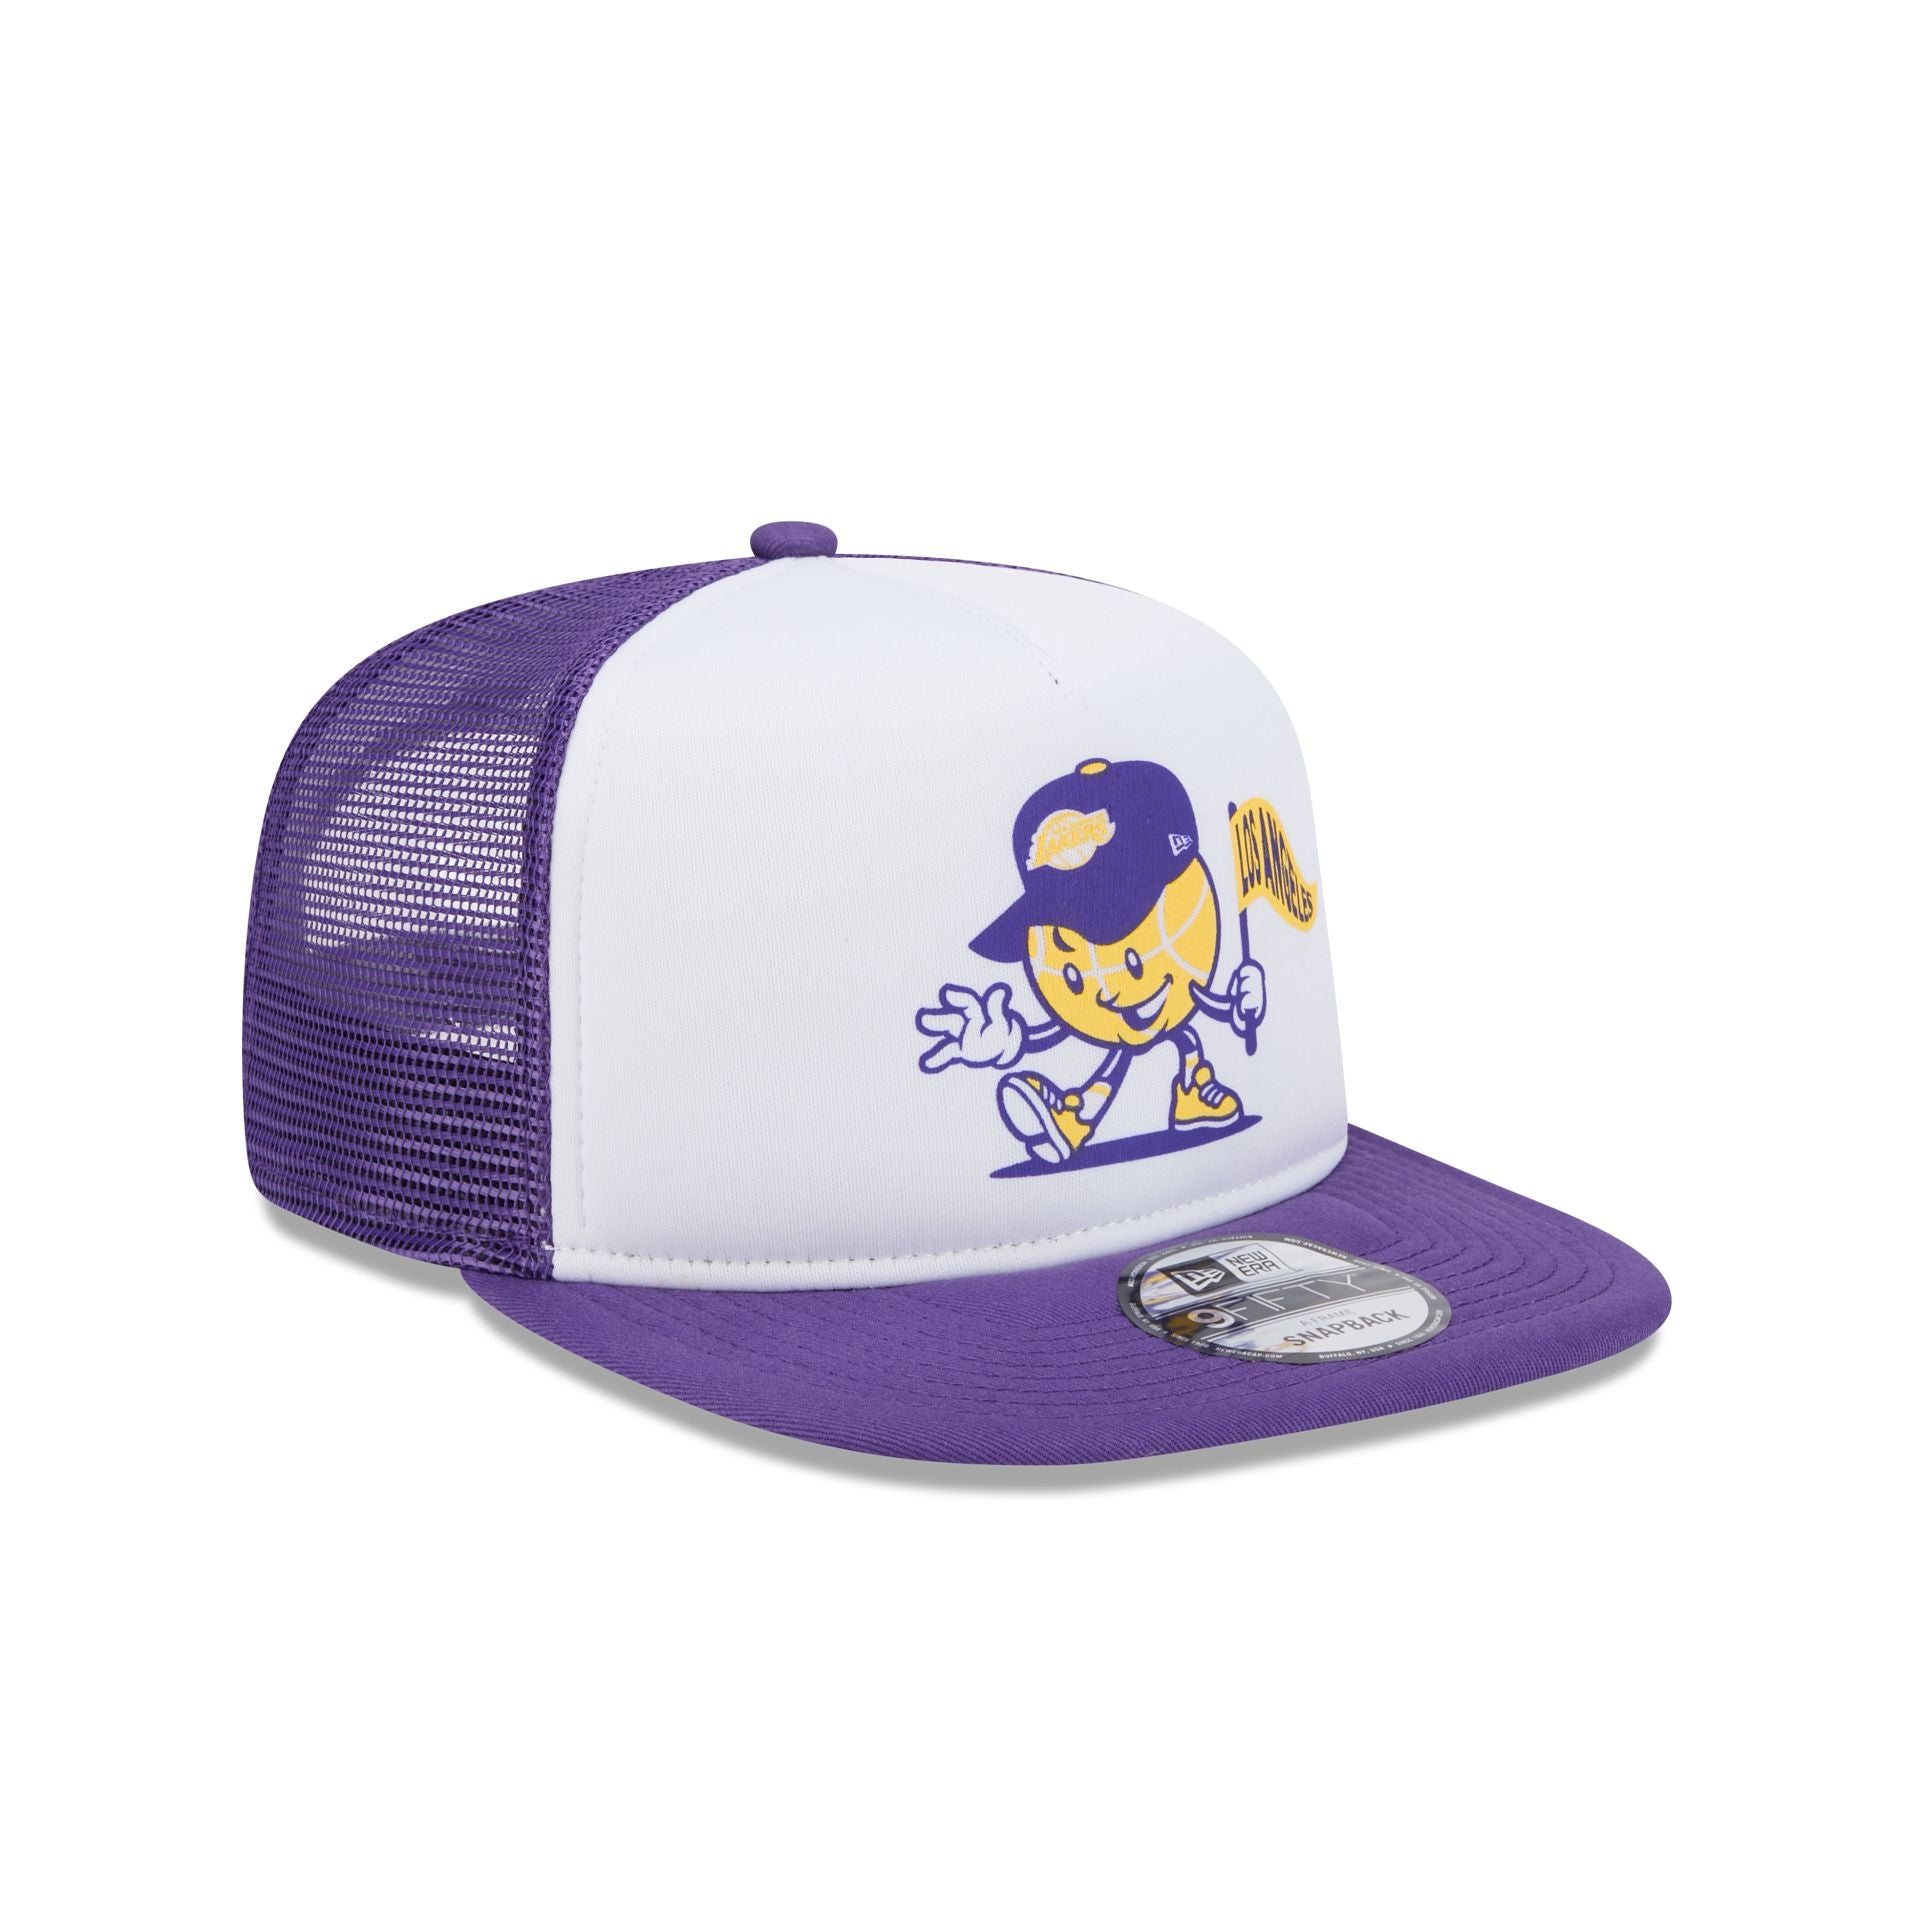 Image of Los Angeles Lakers Court Sport 9FIFTY A-Frame Trucker